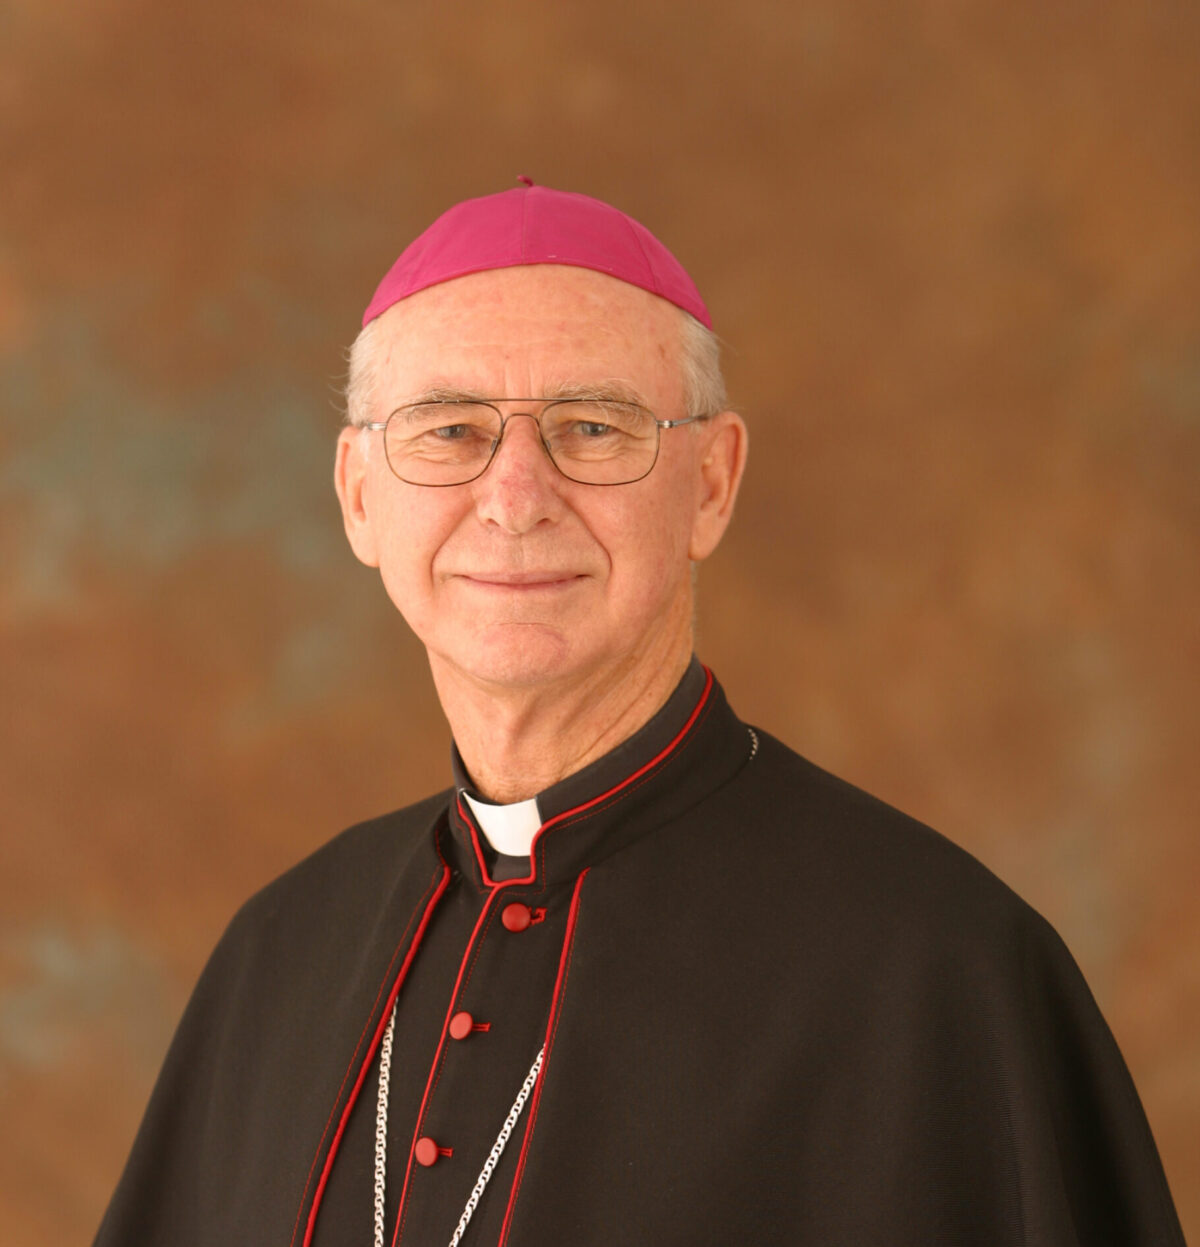 The Diocese of Bathurst mourns the death of Bishop Emeritus Kevin Manning